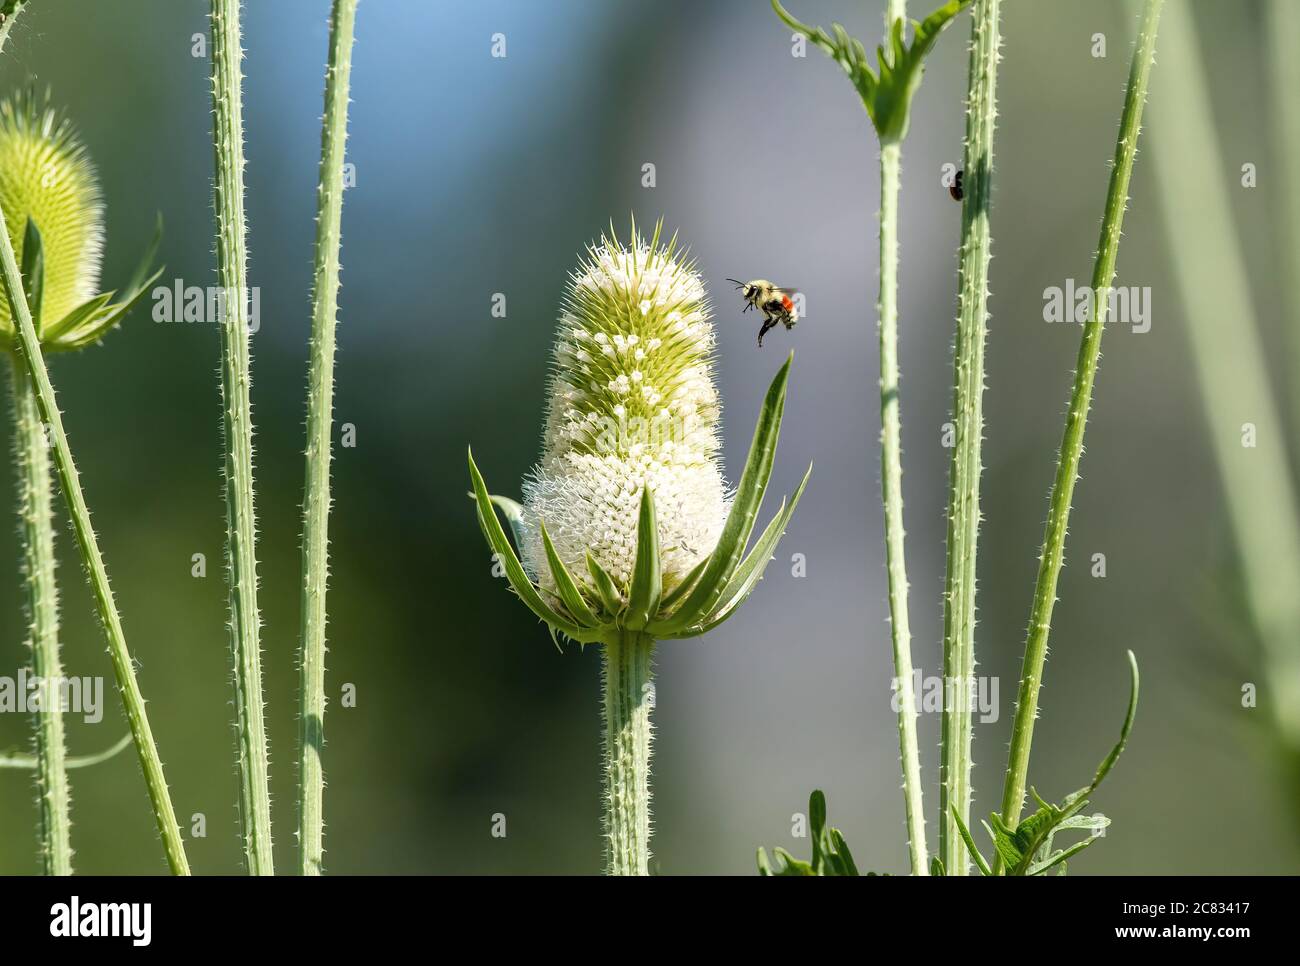 A Tricolored or Orange-Belted Bumblebee hovers around a flower stalk of a giant White Teasel plant. Stock Photo